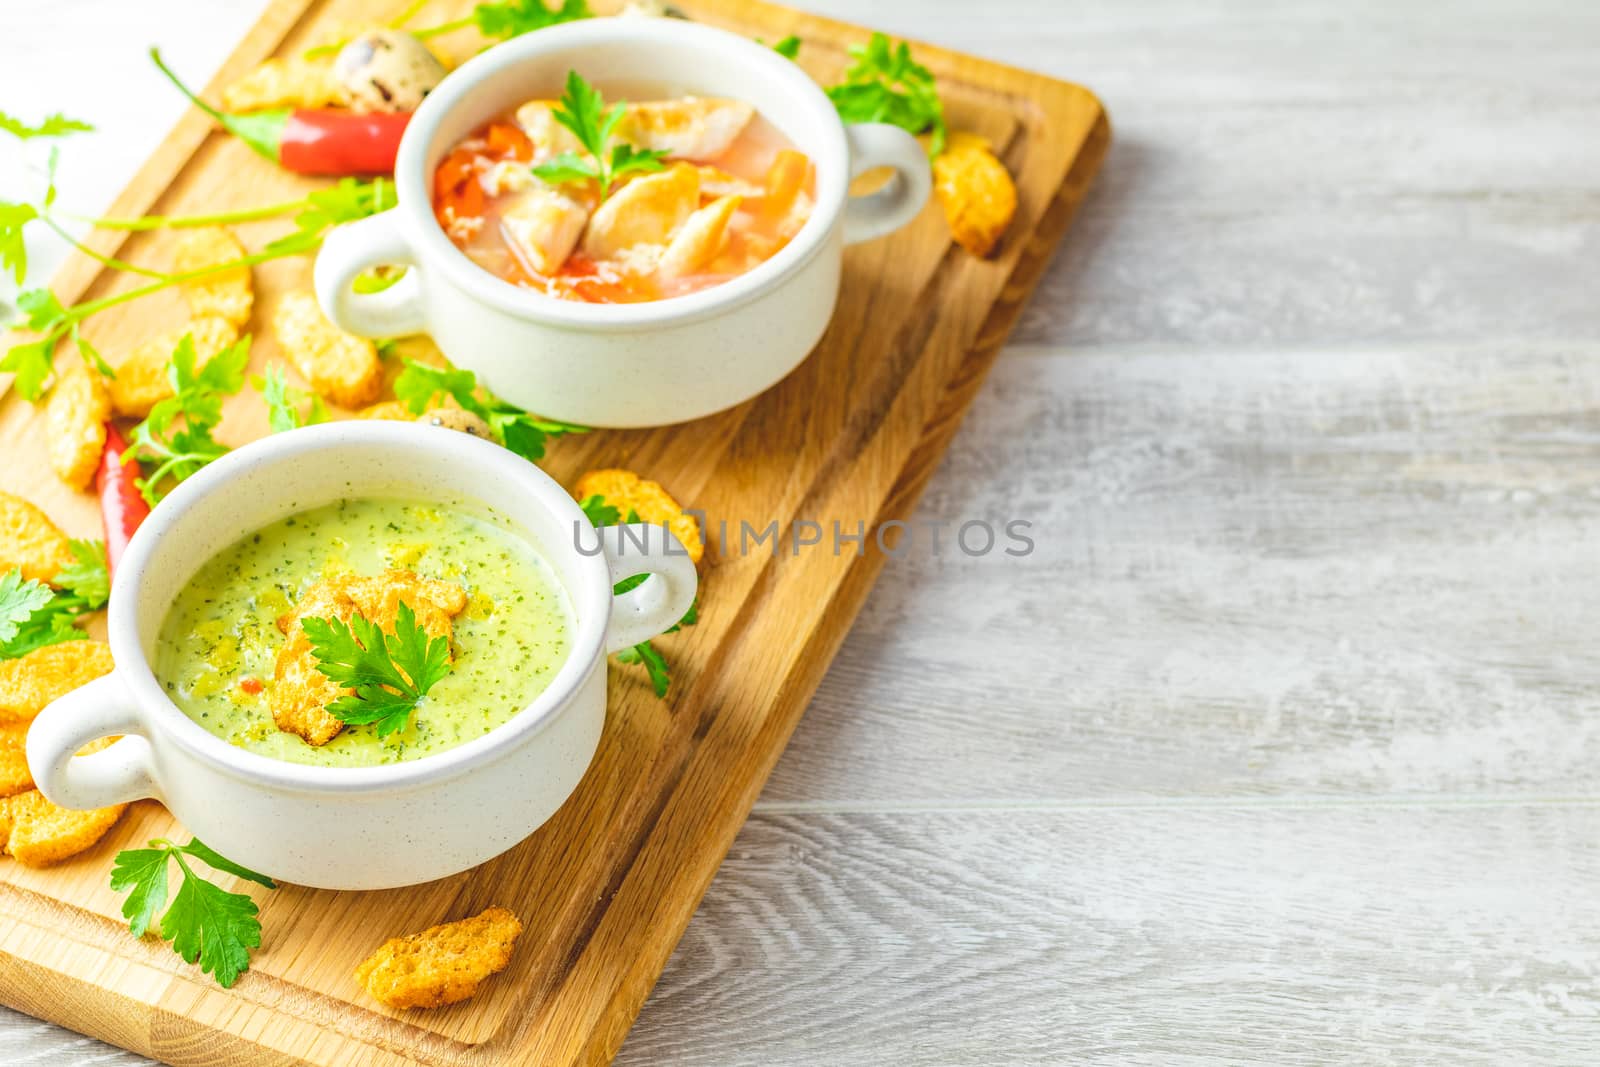 Concept of healthy vegetable and legume soups. Vegetables soup with carrot, eggs and chicken, mushroom cream soup with herbs and crackers and ingredients. Background of a light gray board, copy space